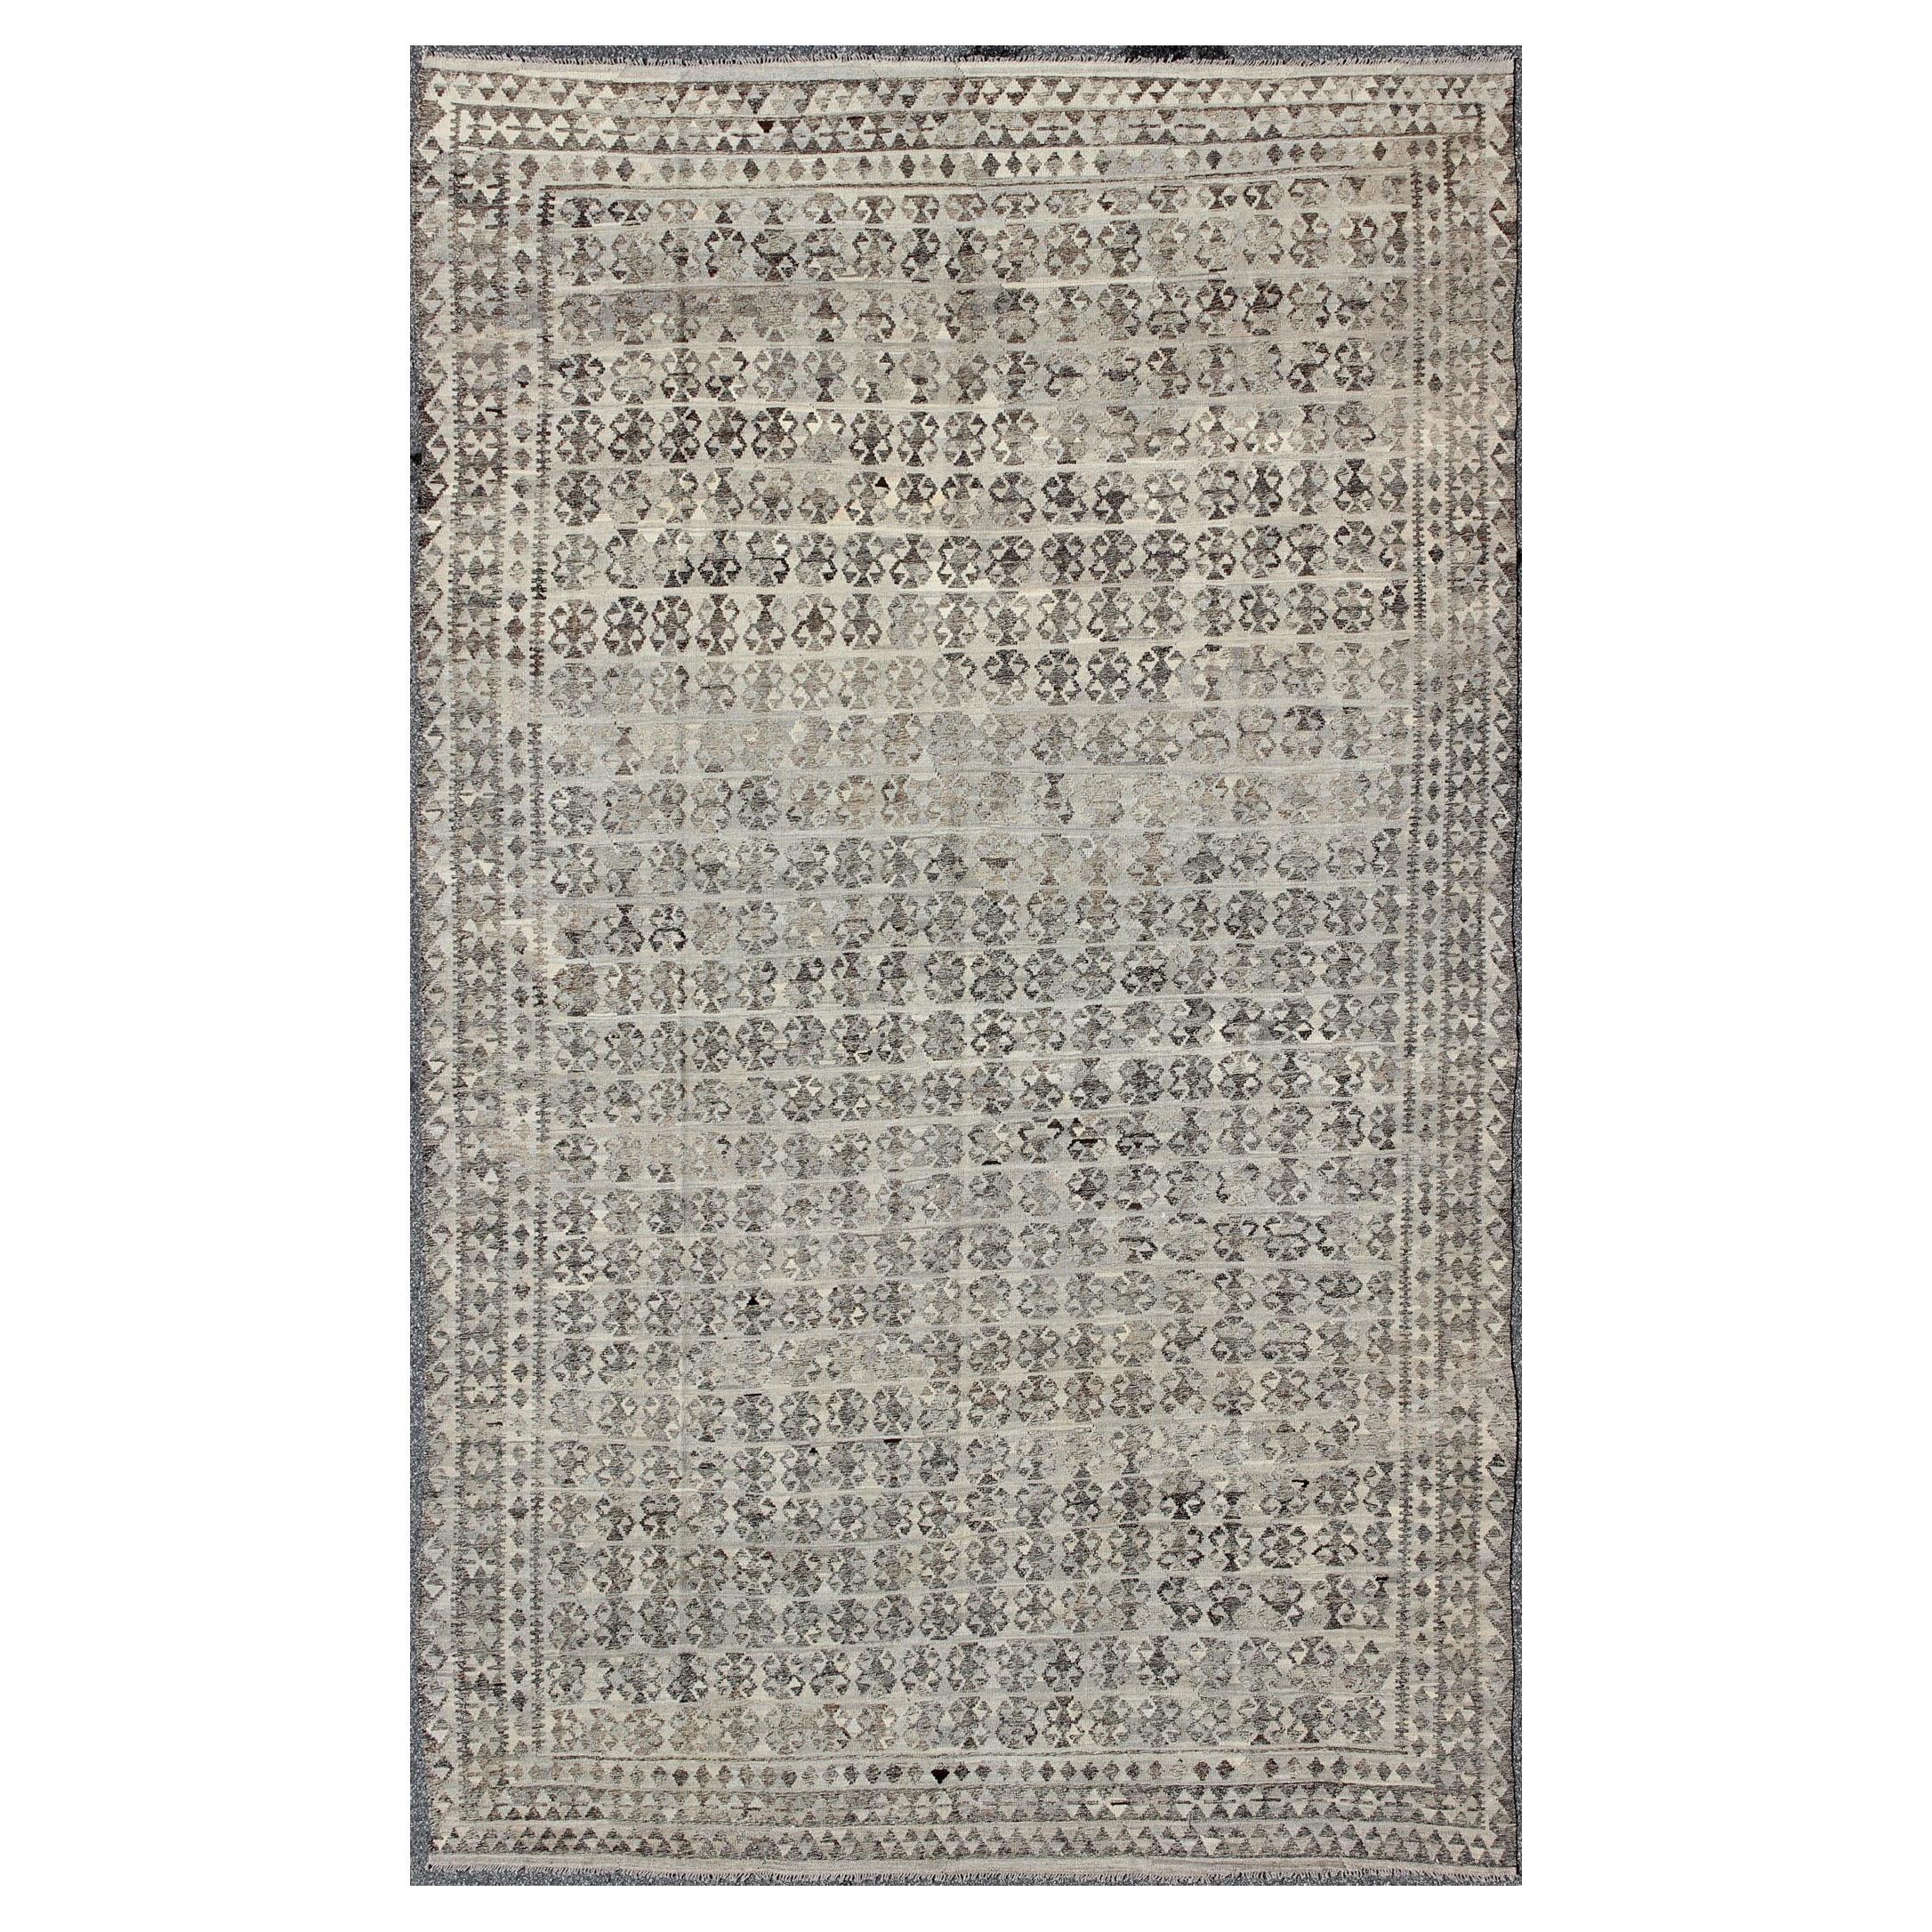 Large Kilim Rug in Shades of Gray, Silver, Silver Blue and Charcoal For Sale